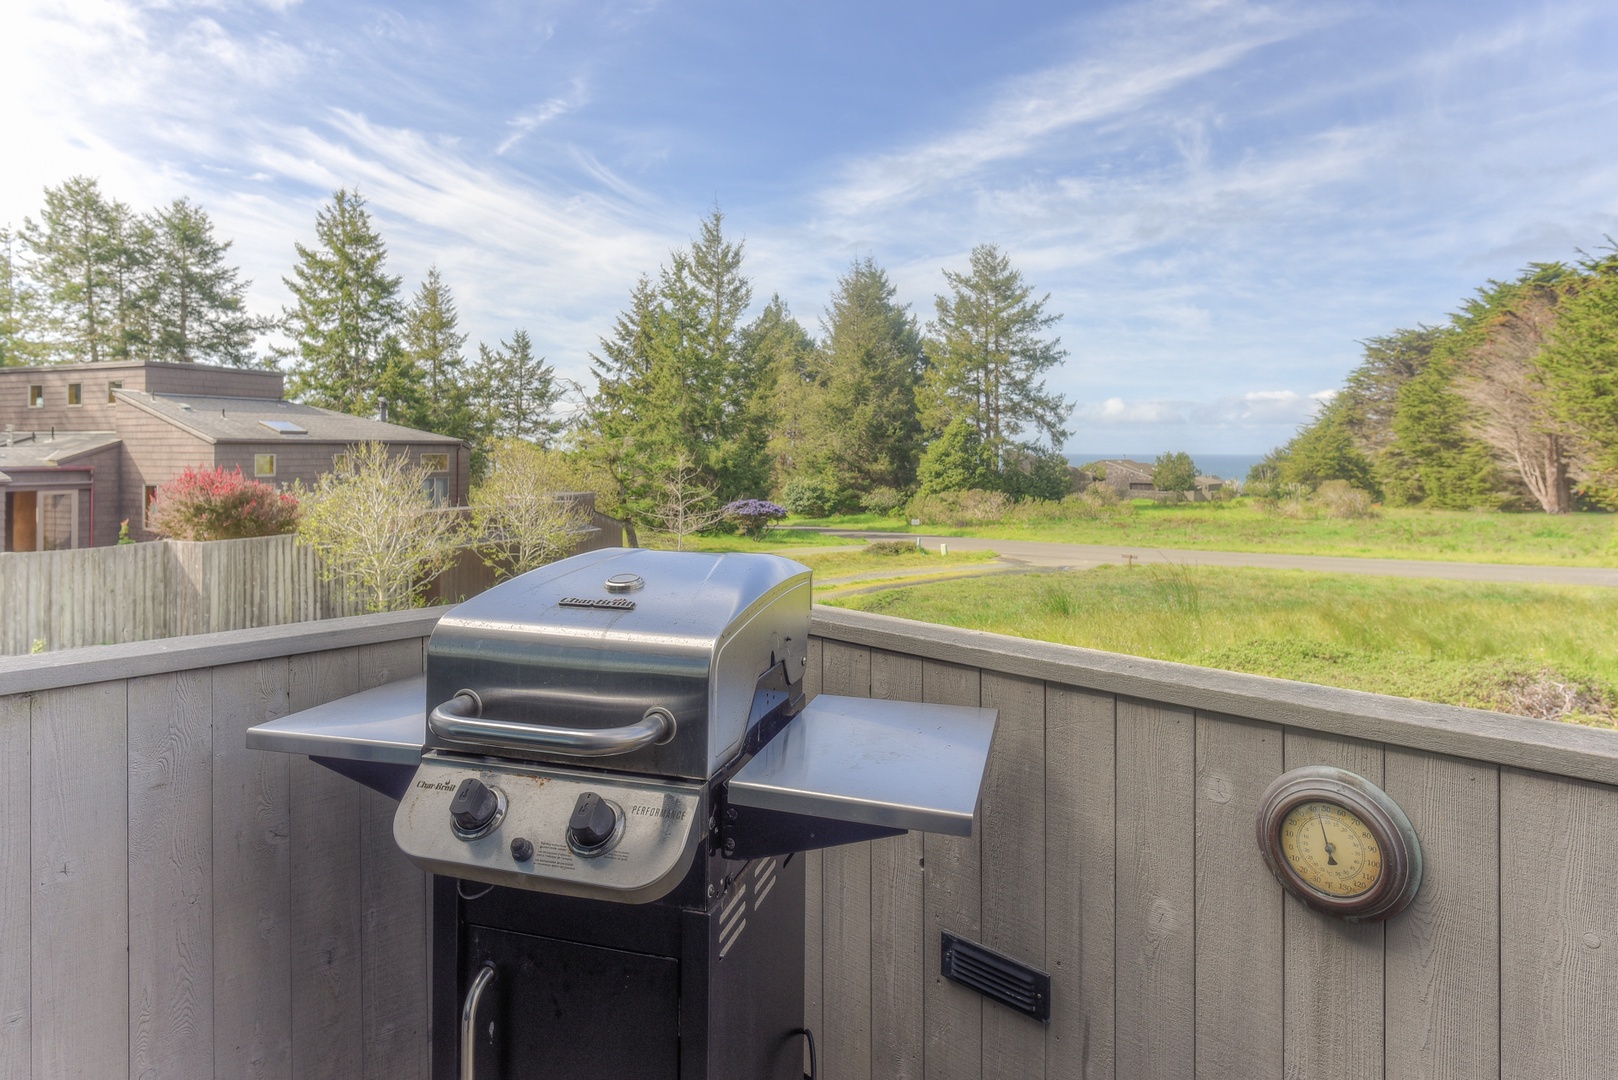 Spacious deck with outdoor seating, grill, and hot tub